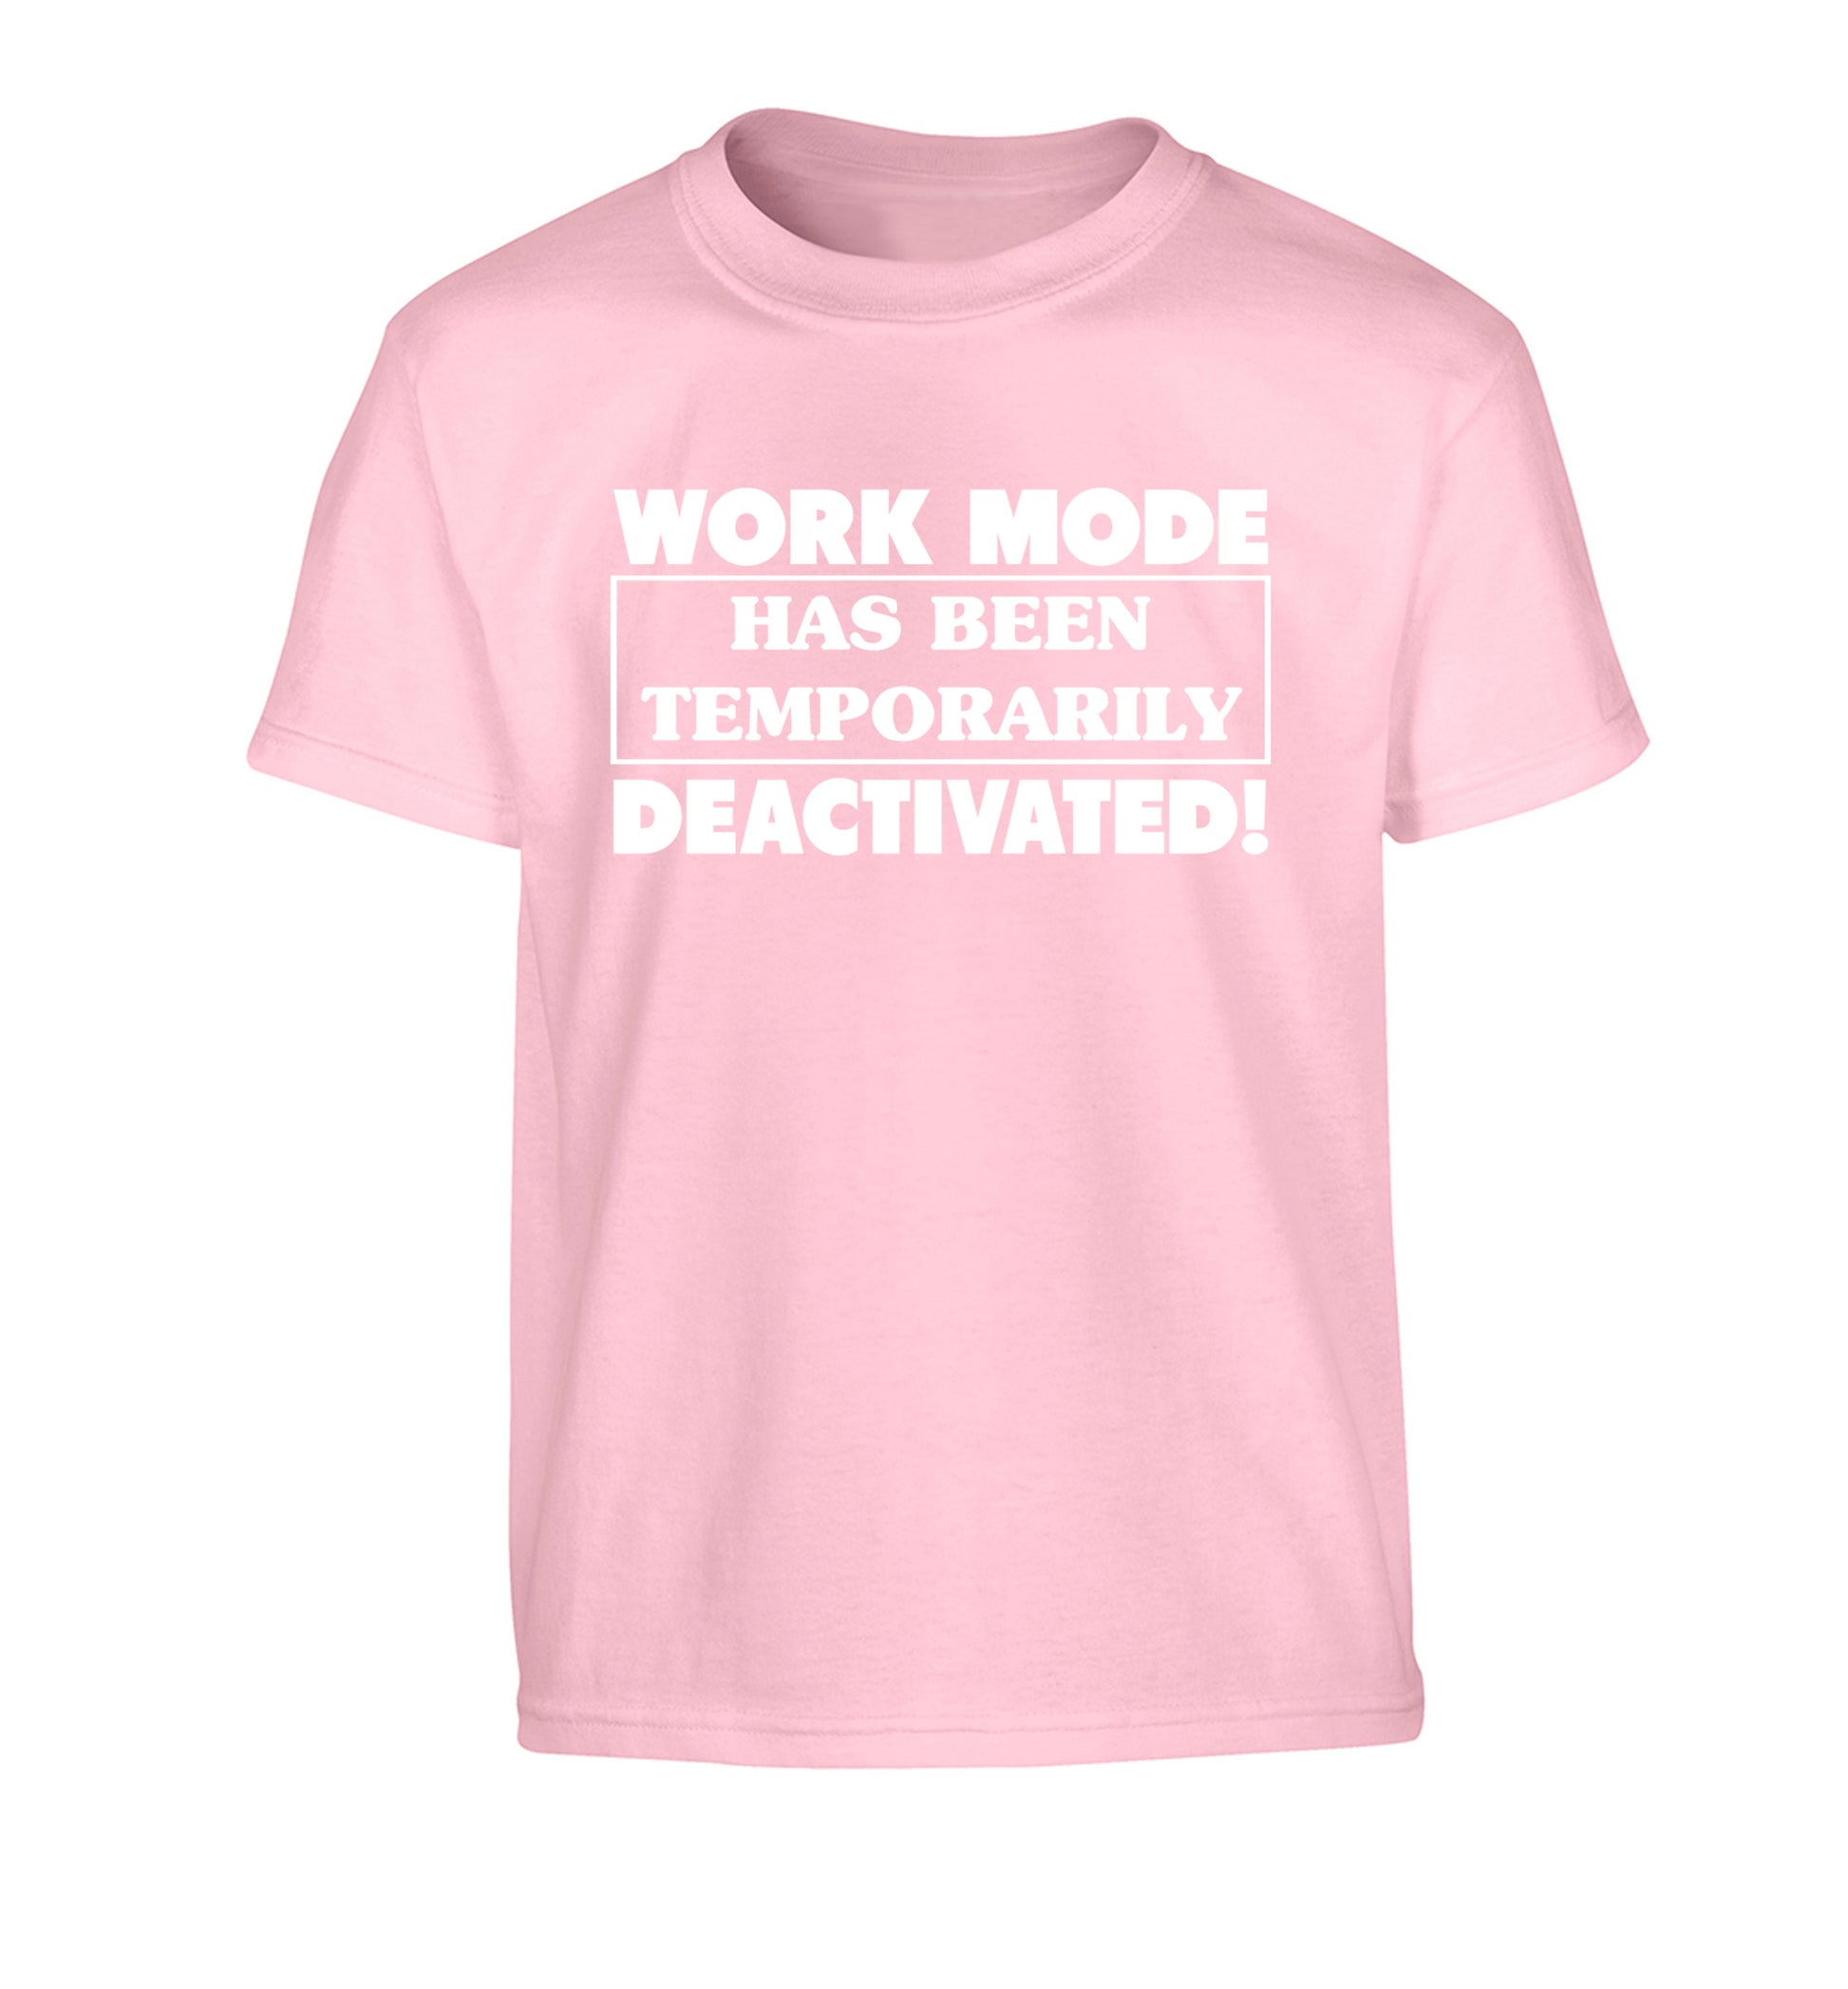 Work mode has now been temporarily deactivated Children's light pink Tshirt 12-13 Years